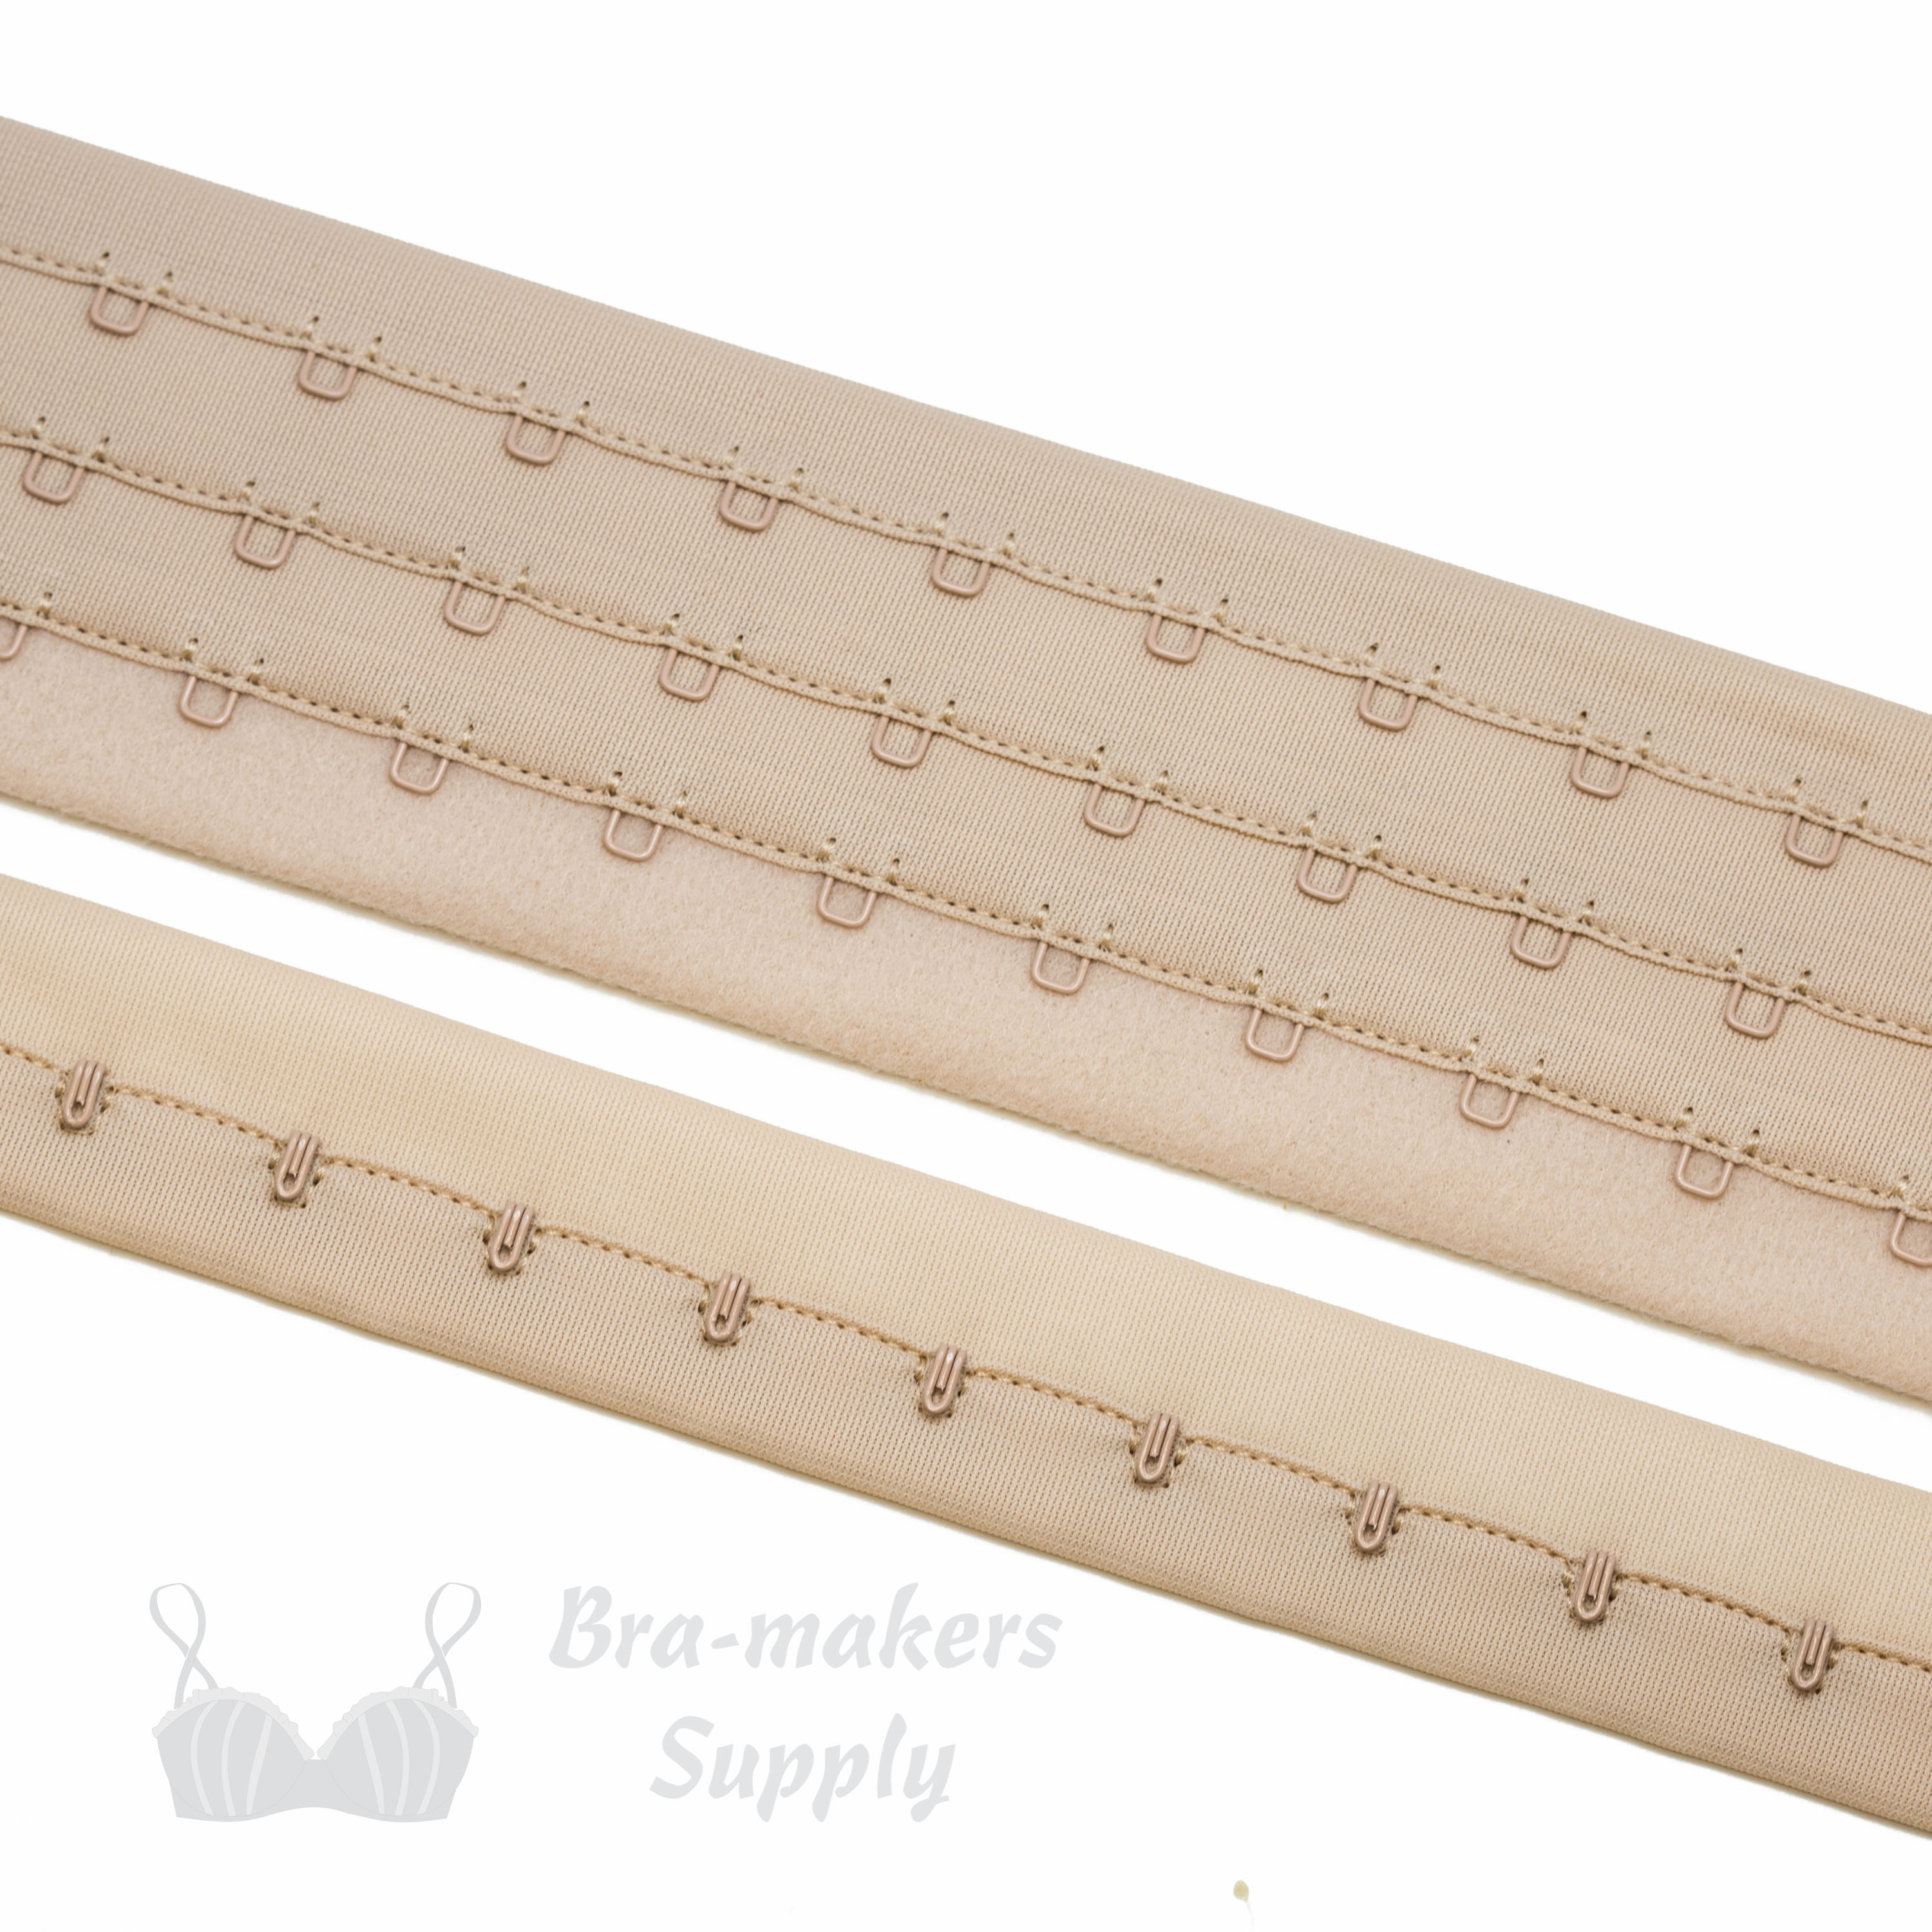 nylon hook and eye tape HE-53 beige from Bra-Makers Supply separate shown